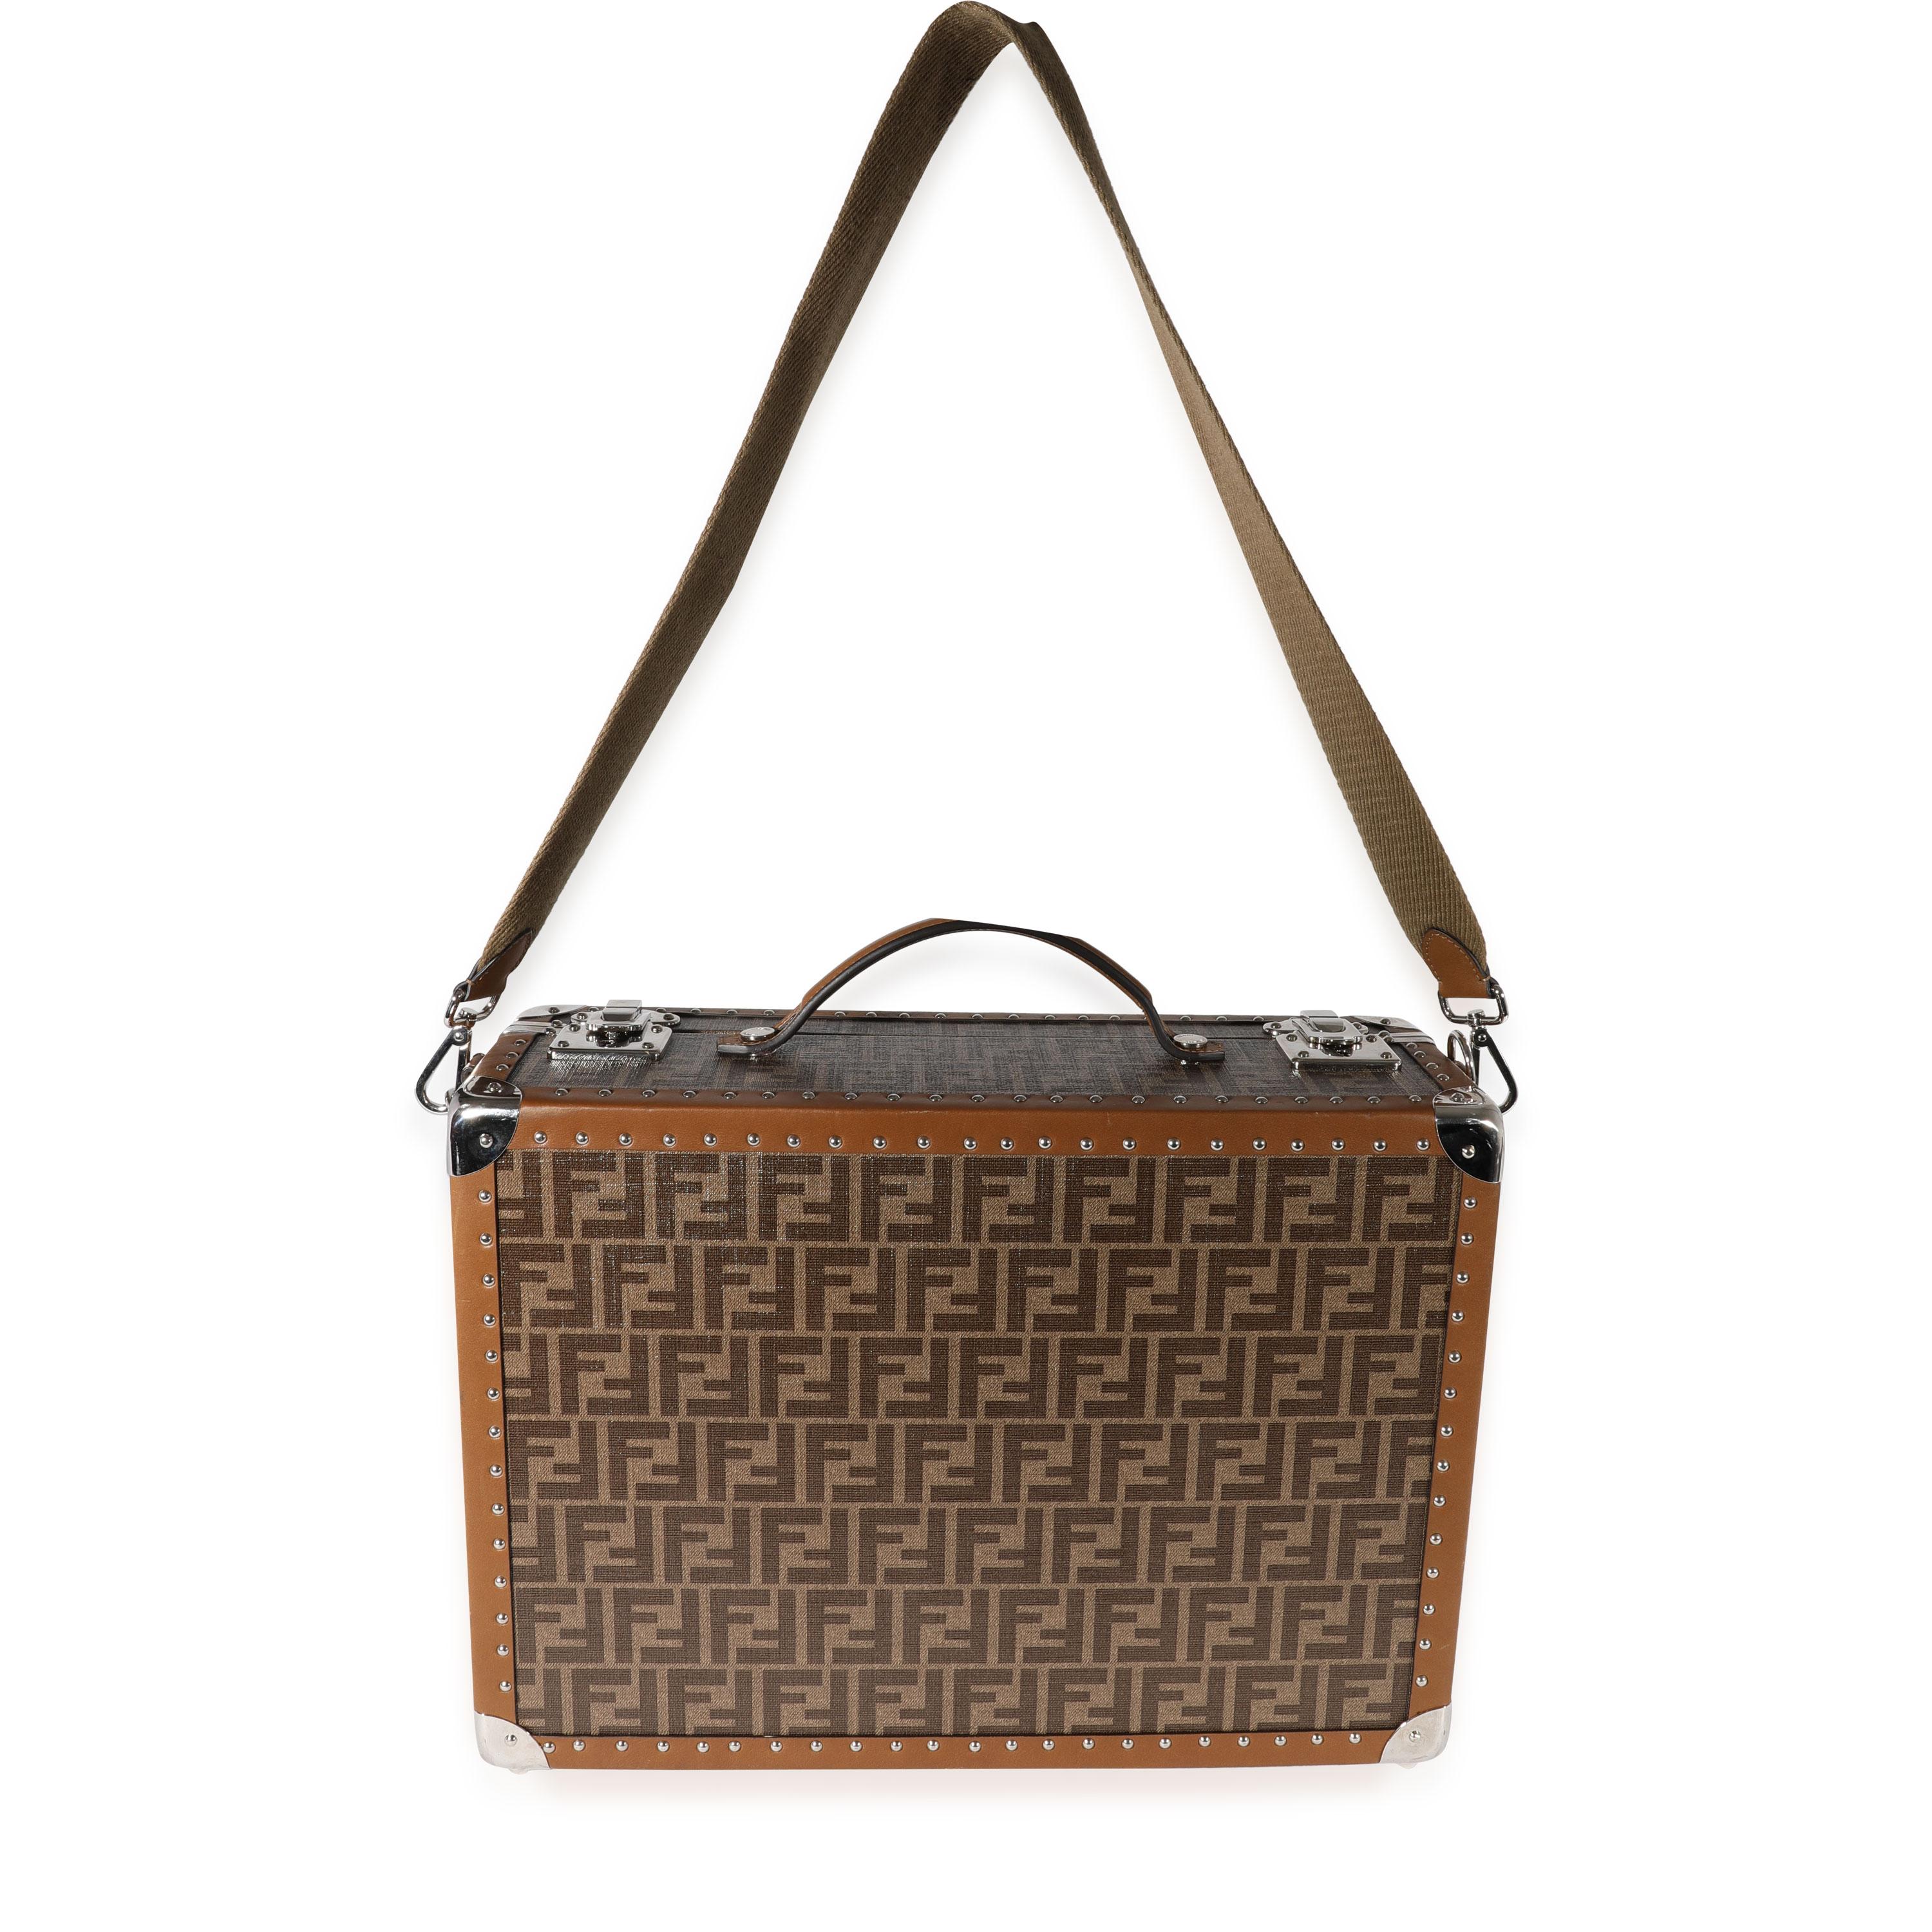 Listing Title: Fendi Brown FF Jacquard Motif Glazed Fabric Medium Rigid Suitcase
SKU: 122357
MSRP: 7800.00
Condition: Pre-owned 
Handbag Condition: Very Good
Condition Comments: Very Good Condition. Lock not included. Scuffing and marks to exterior.